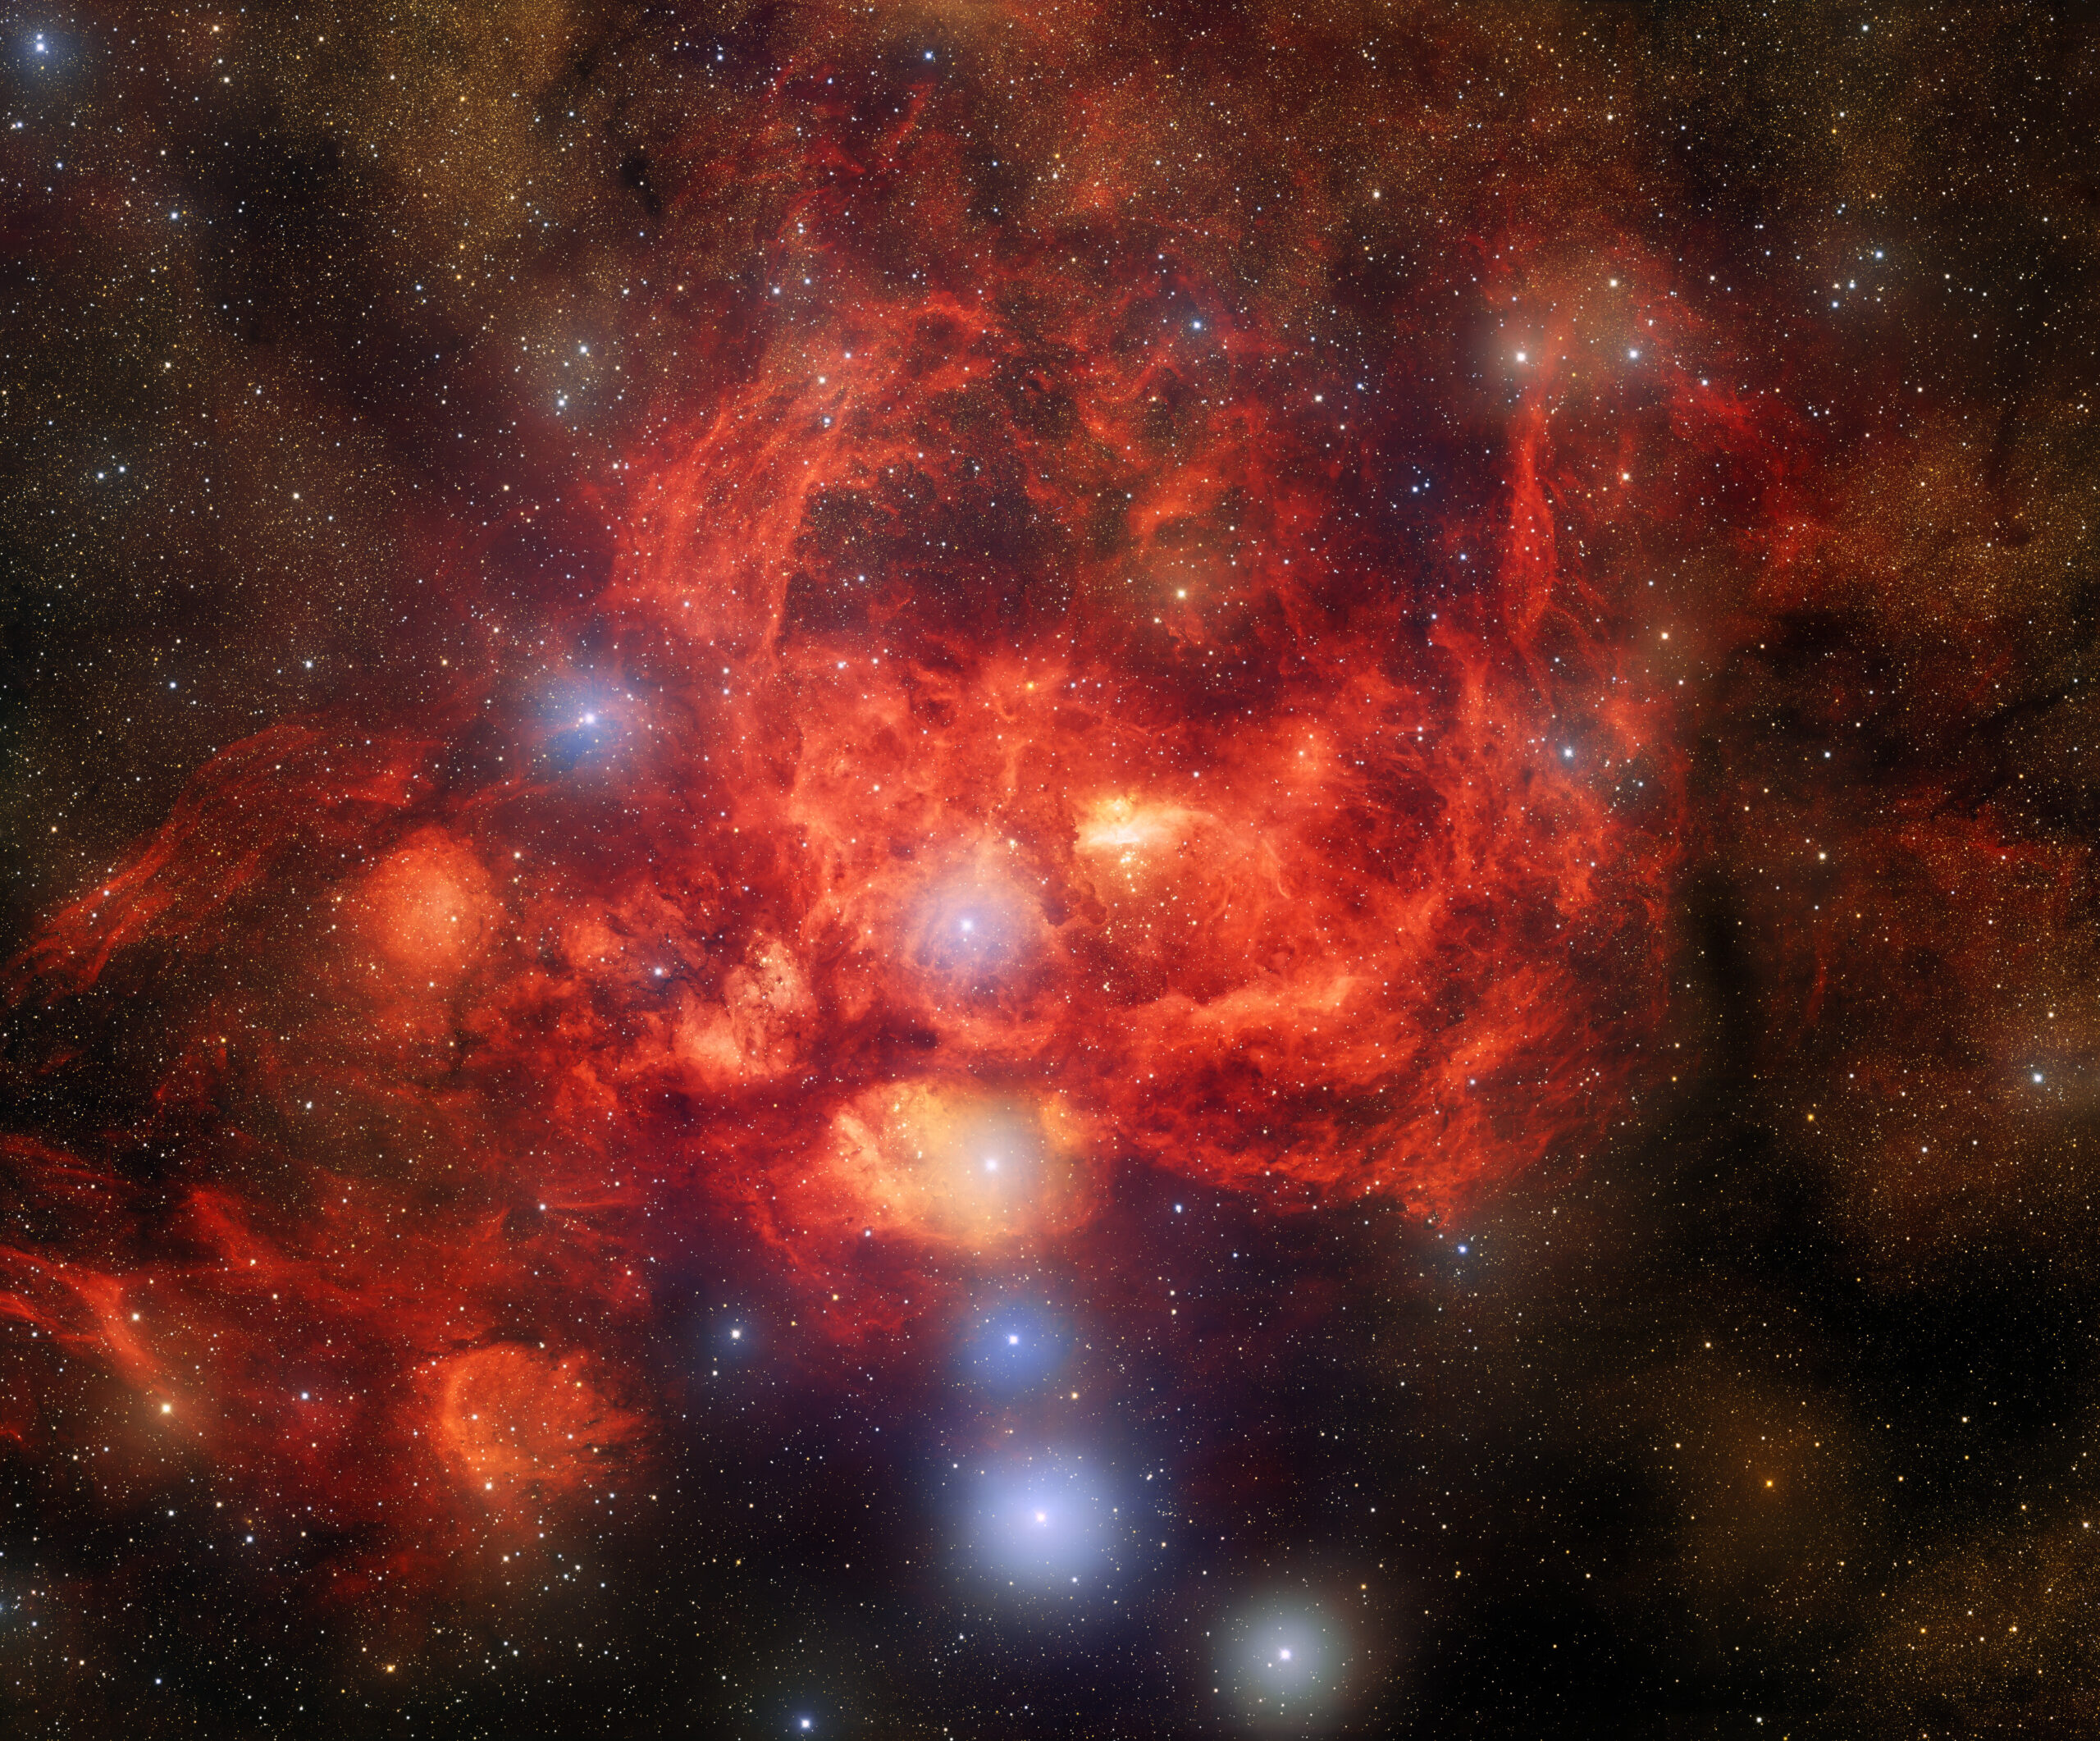 Bright, young stars surrounded by billowing clouds of dust and gas inside the Lobster Nebula. 